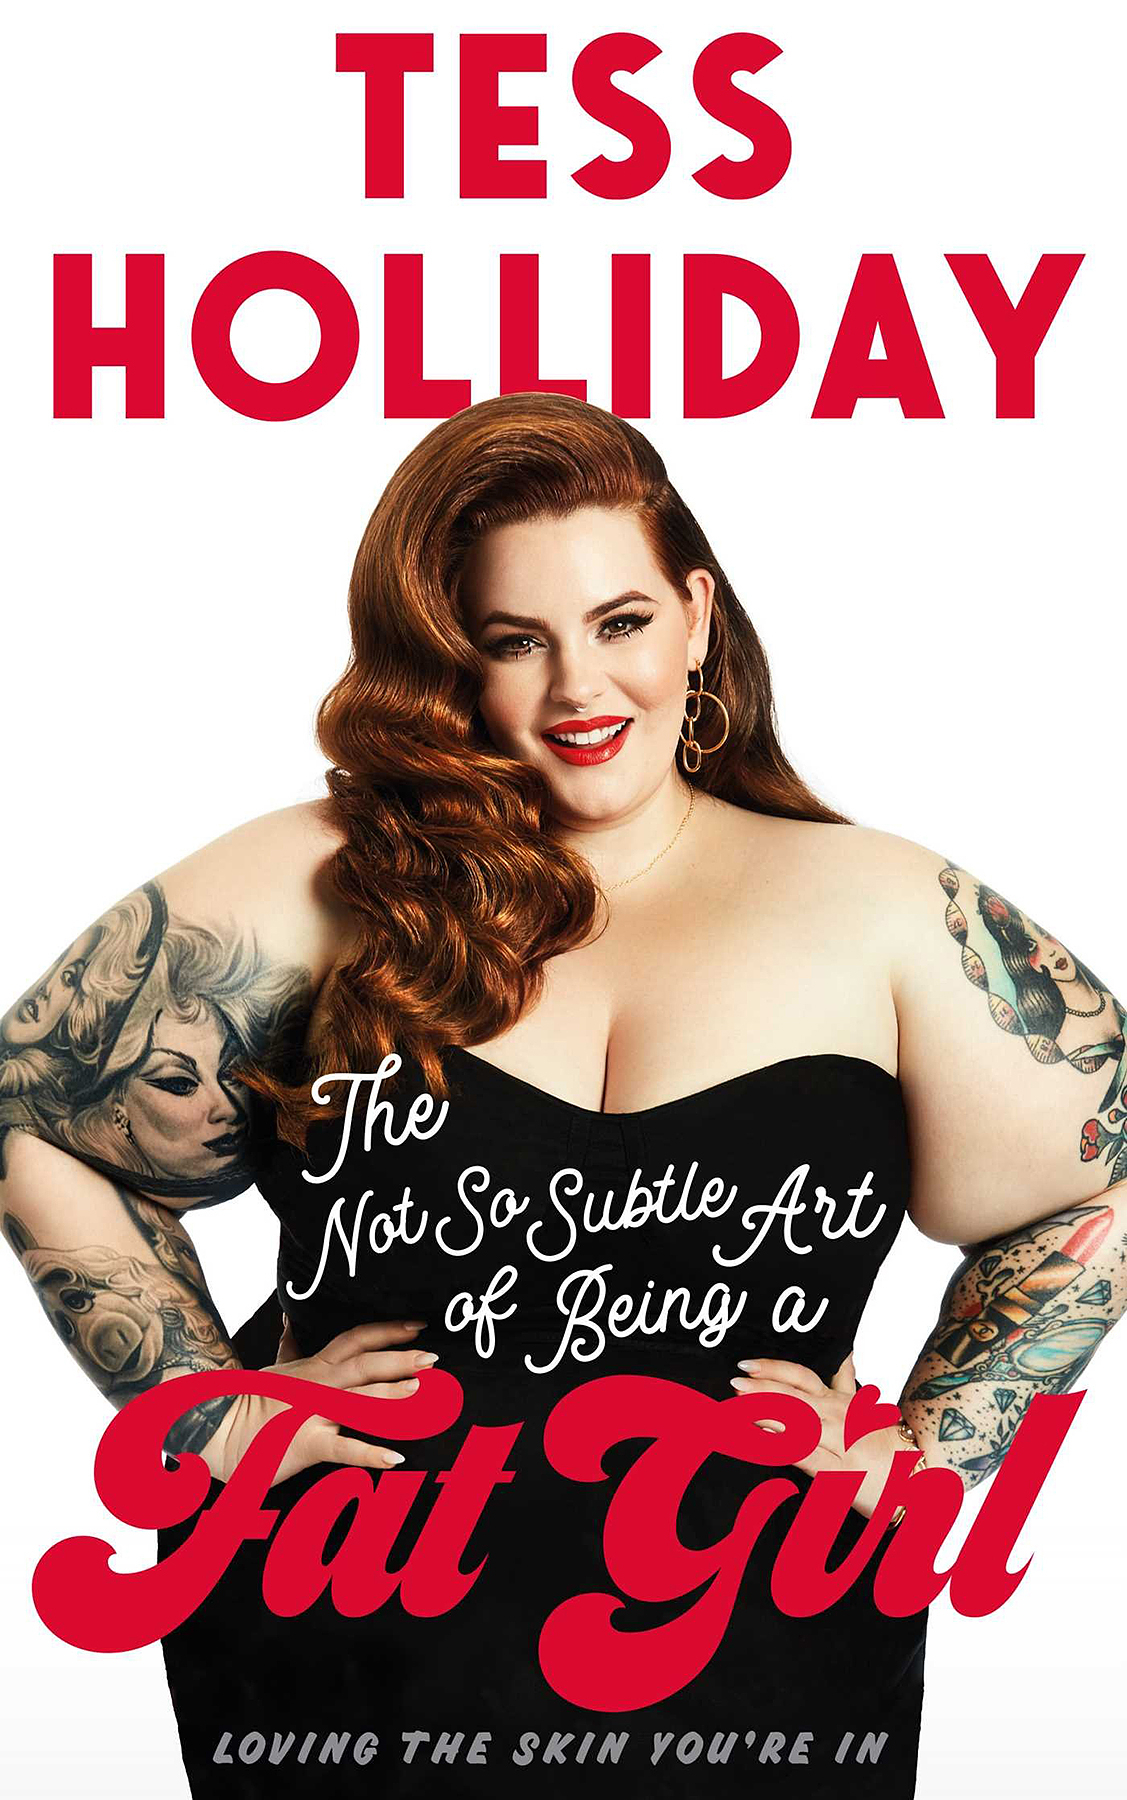 Tess Holliday Never seen a fat girl in her underwear before  Models   The Guardian